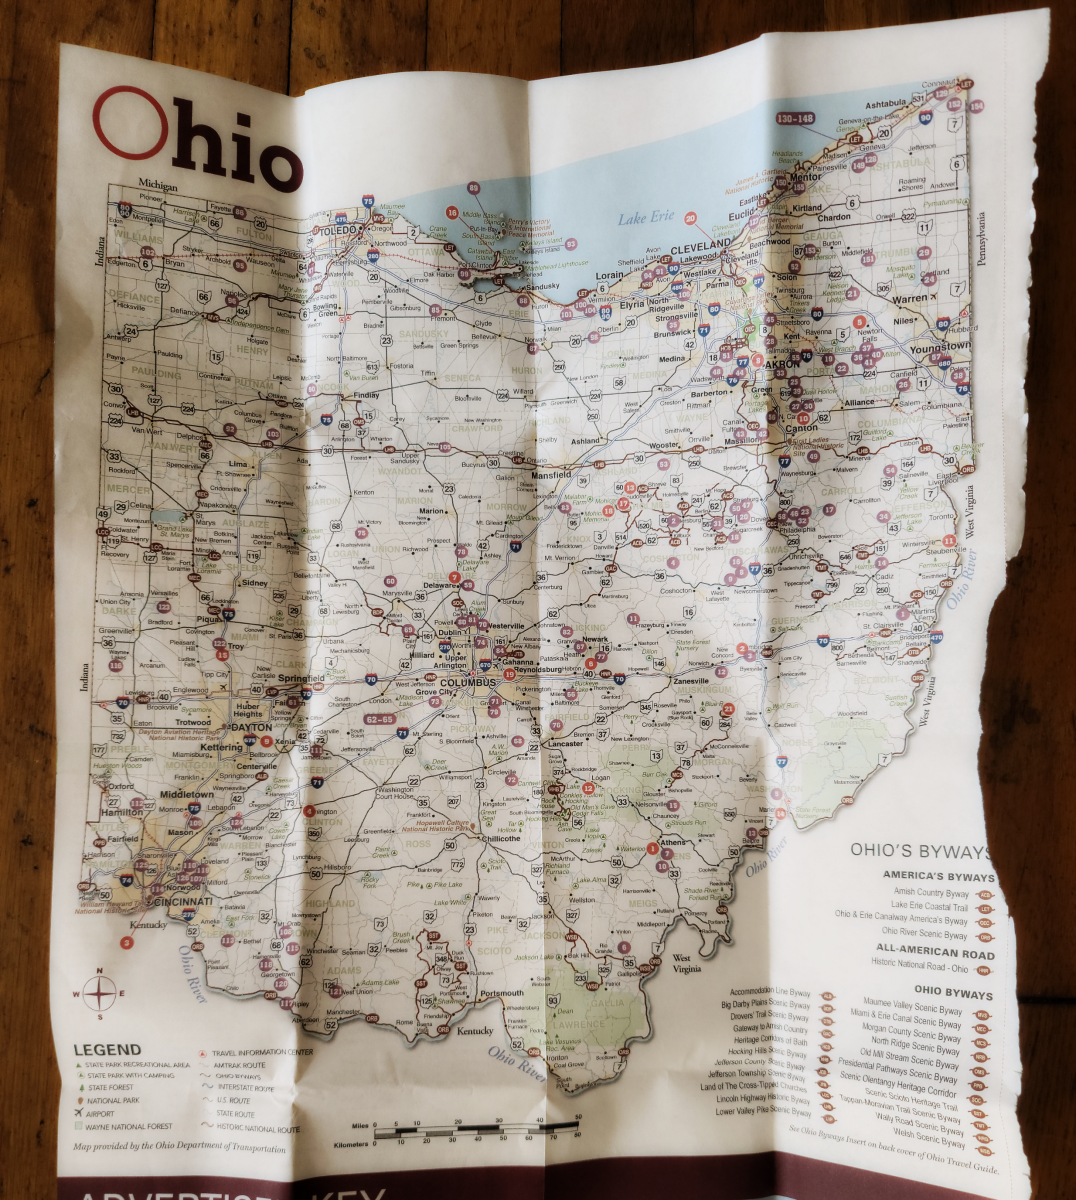 10 Bizarre and Interesting Places to Visit in Ohio